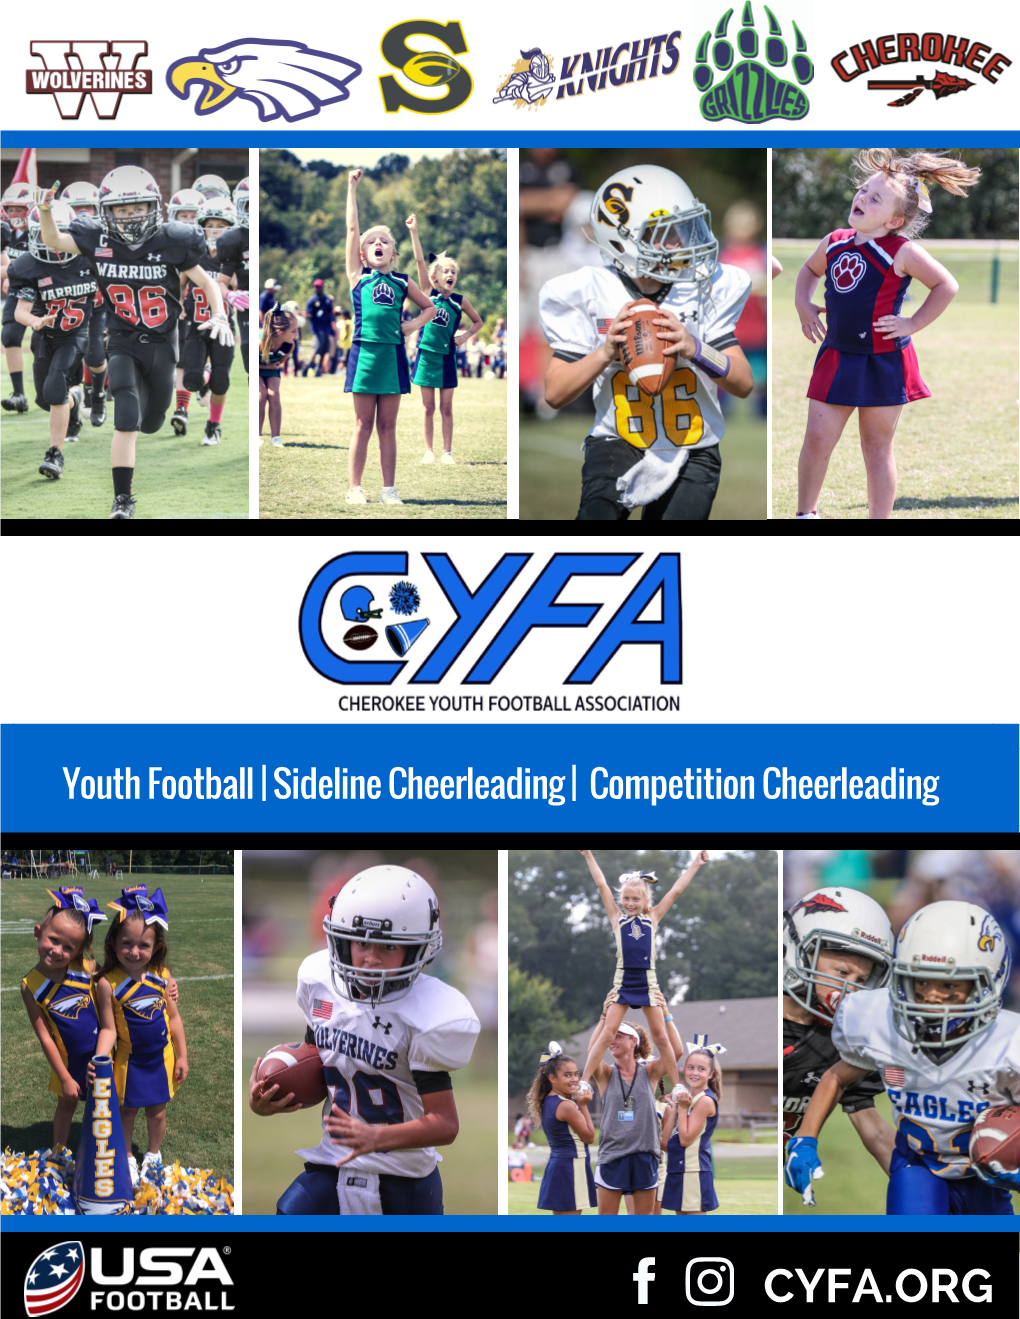 Youth Football | Sideline Cheerleading | Competition Cheerleading